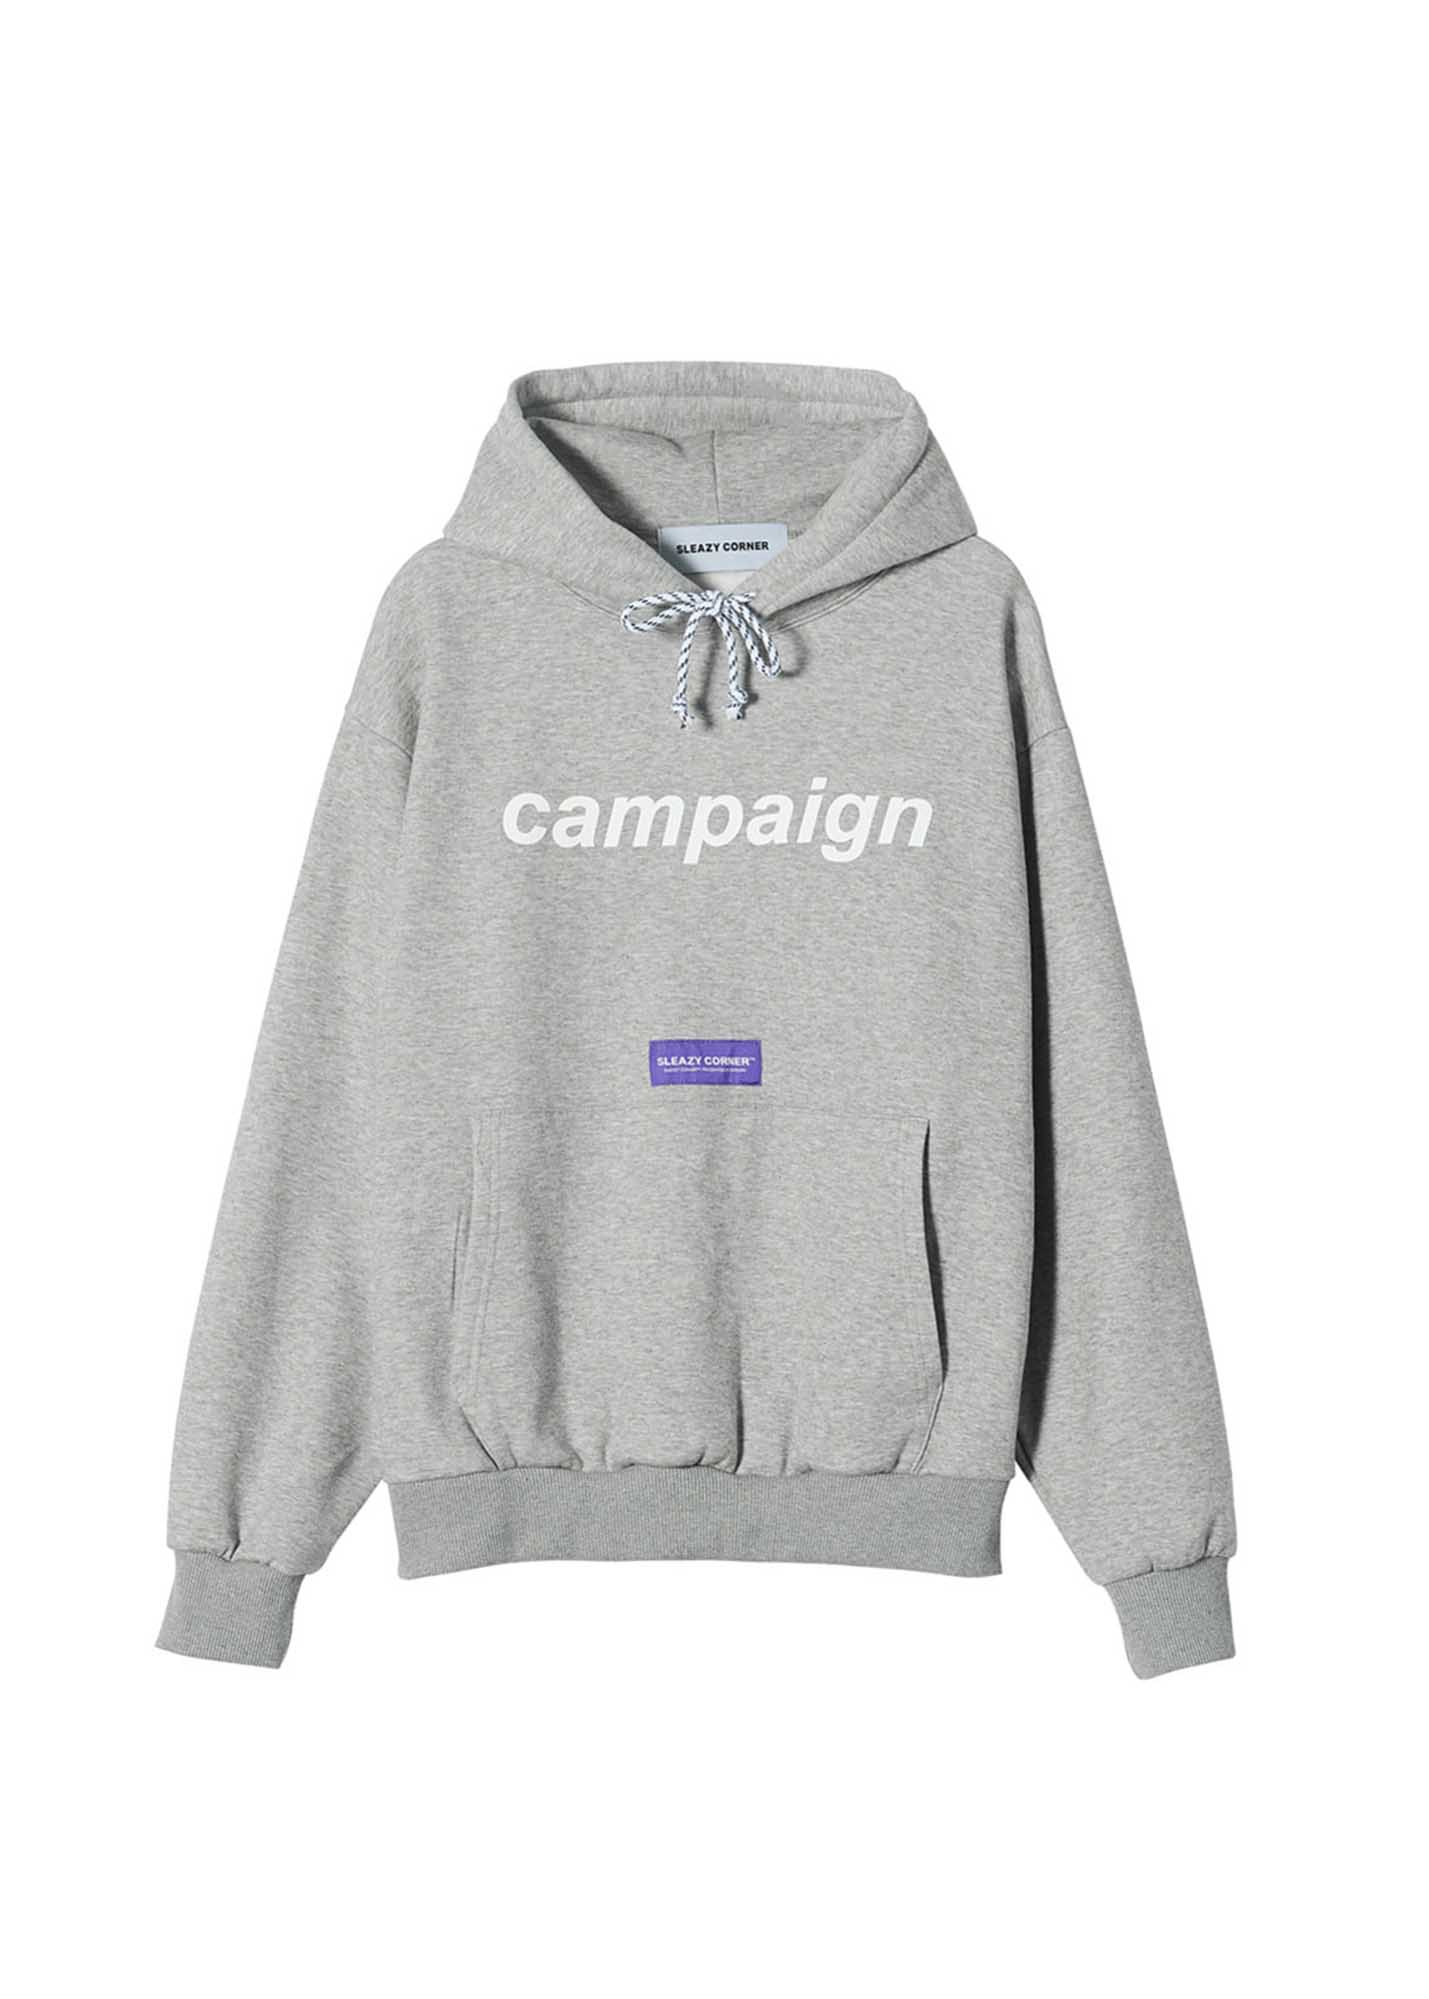 CAMPAIGN HOODIE(GRAY)